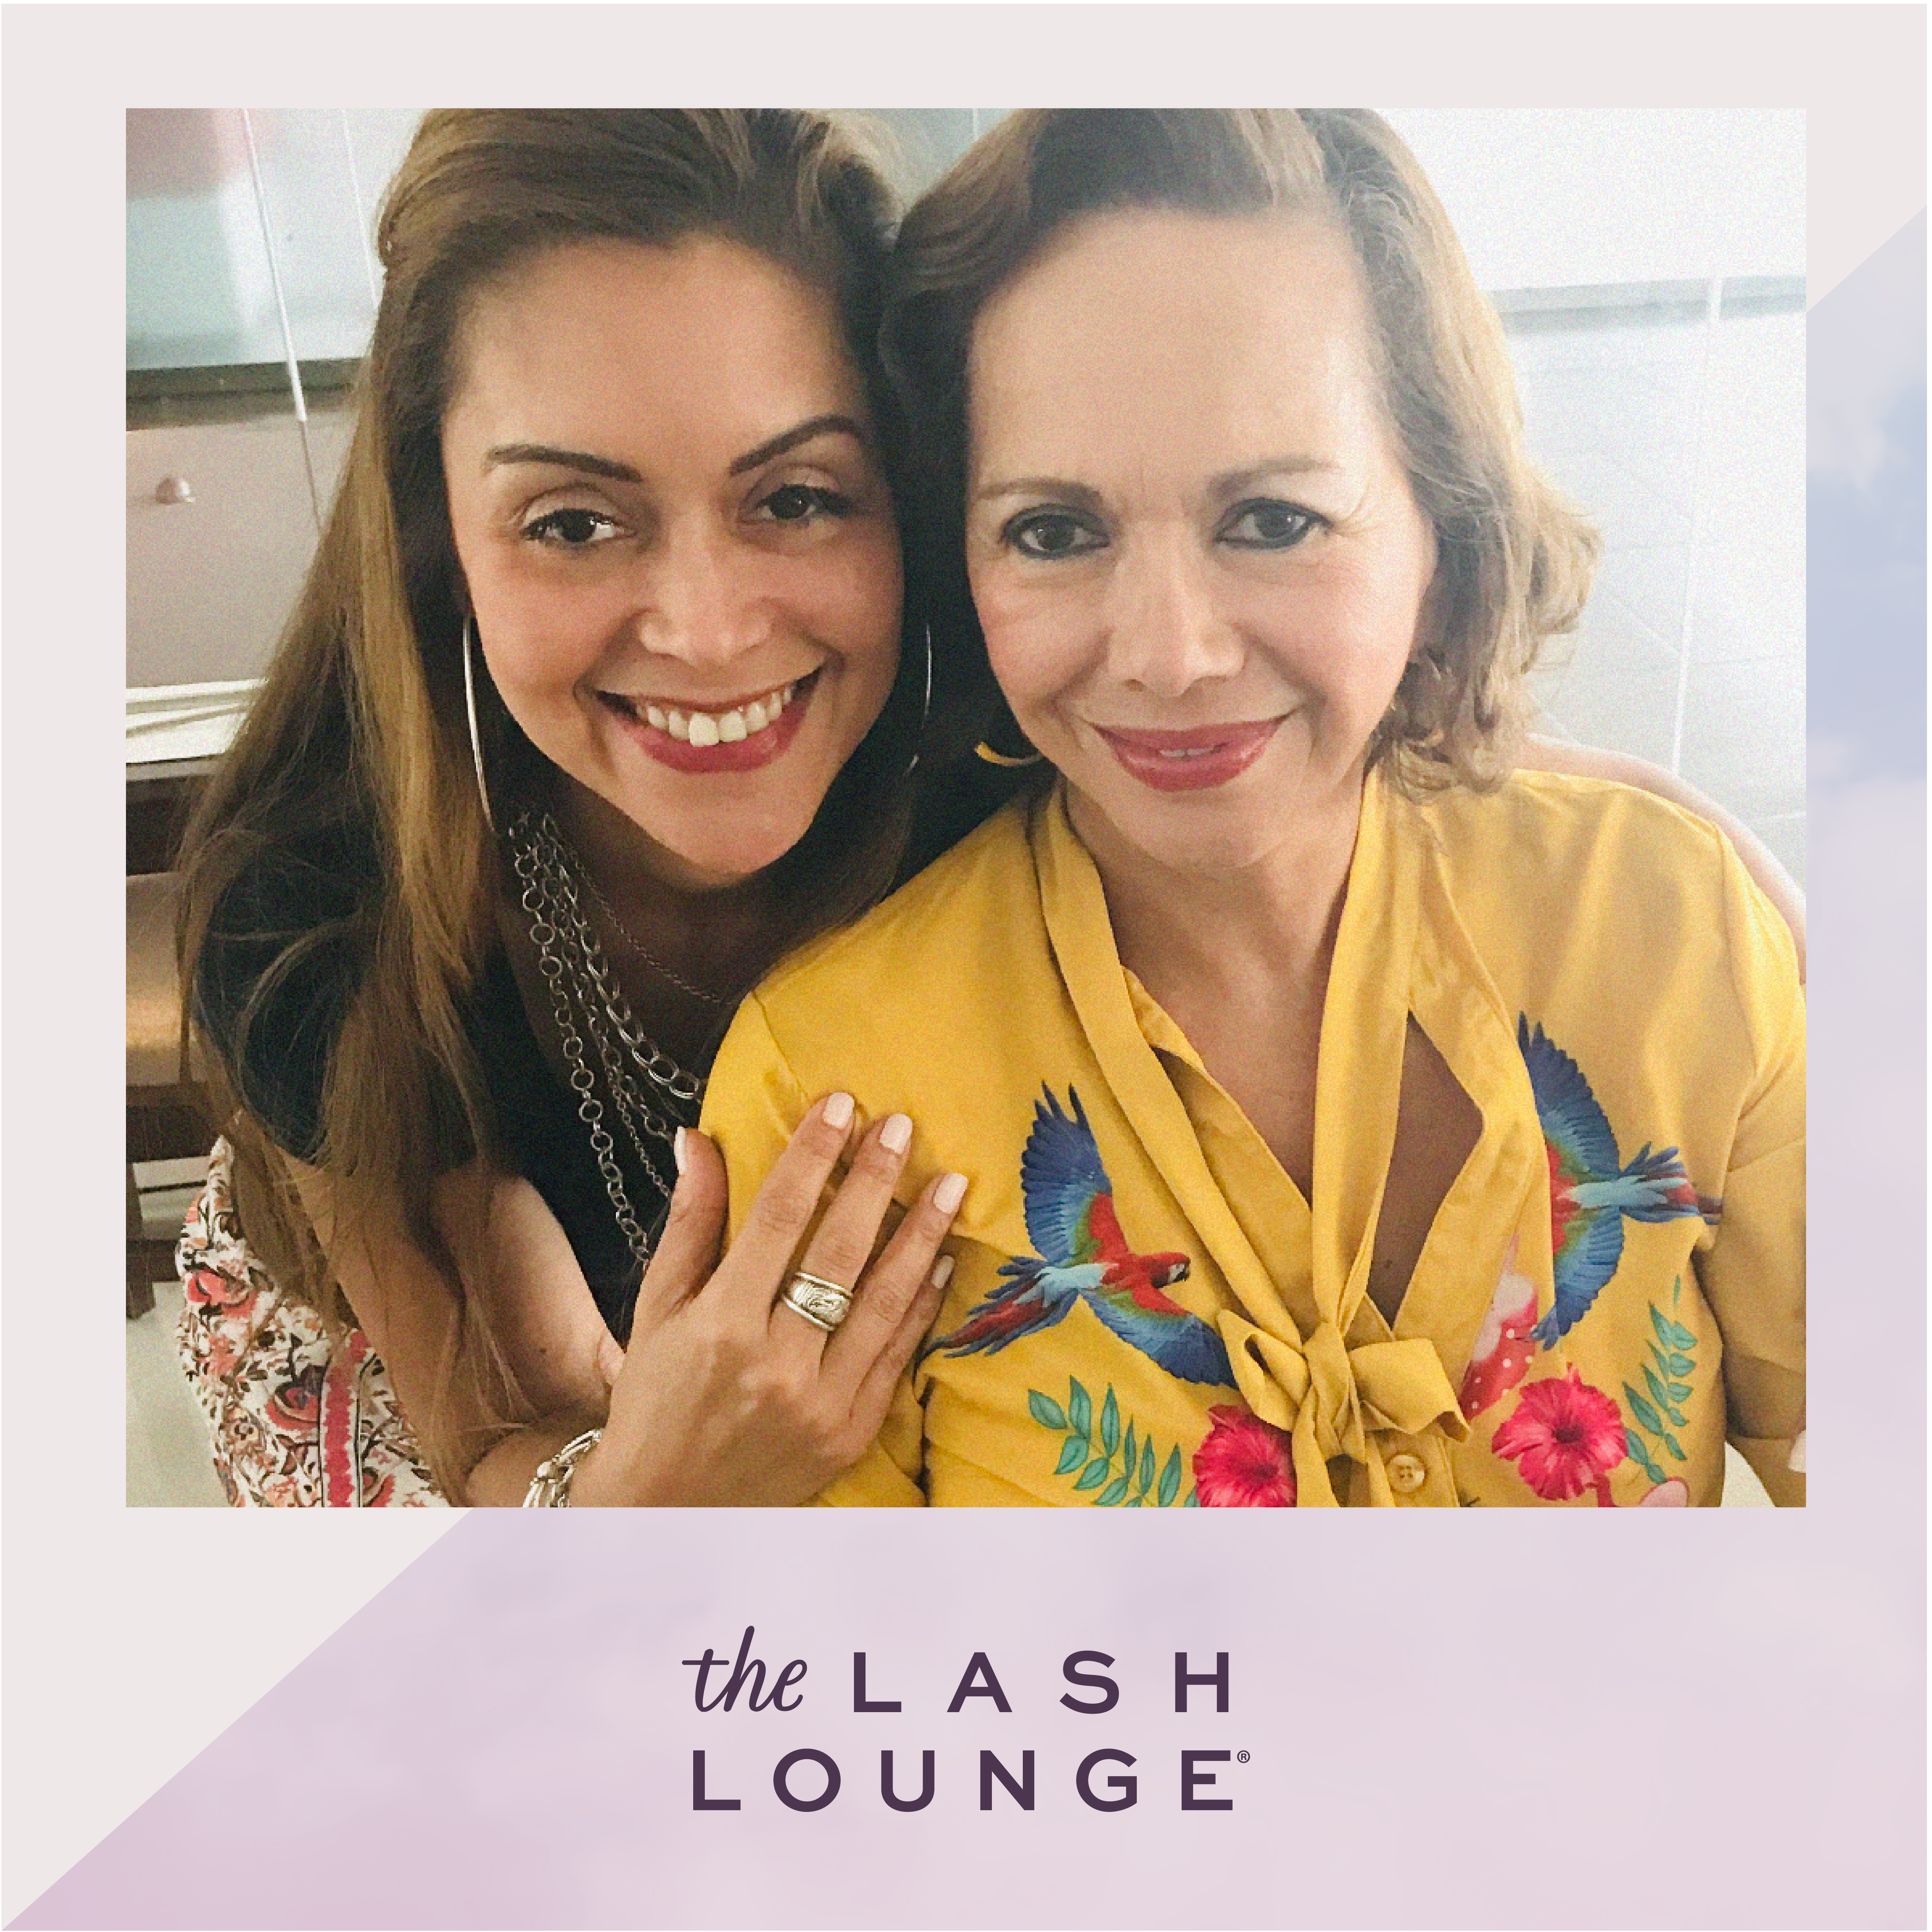 Lash Lounge franchisee with her mom for Mother's Day